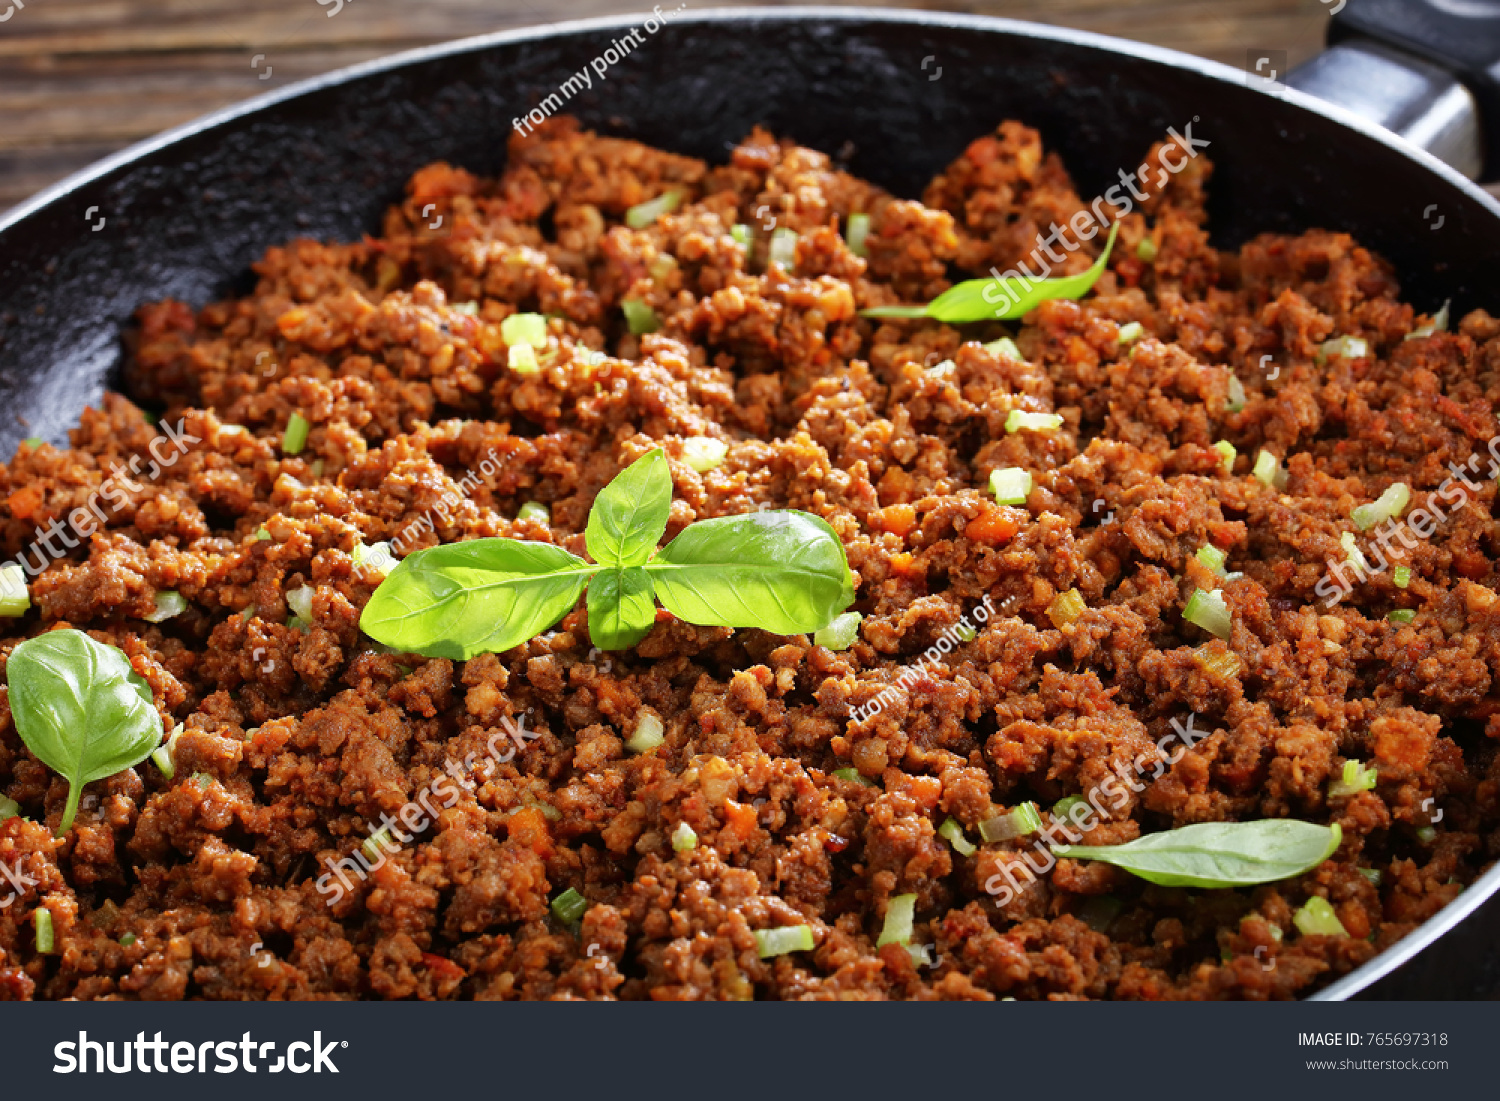 close-up of hot juicy ground beef stewed with tomato sauce, spices, basil, finely chopped vegetables and celery in frying pan, classic recipe, side view from above #765697318